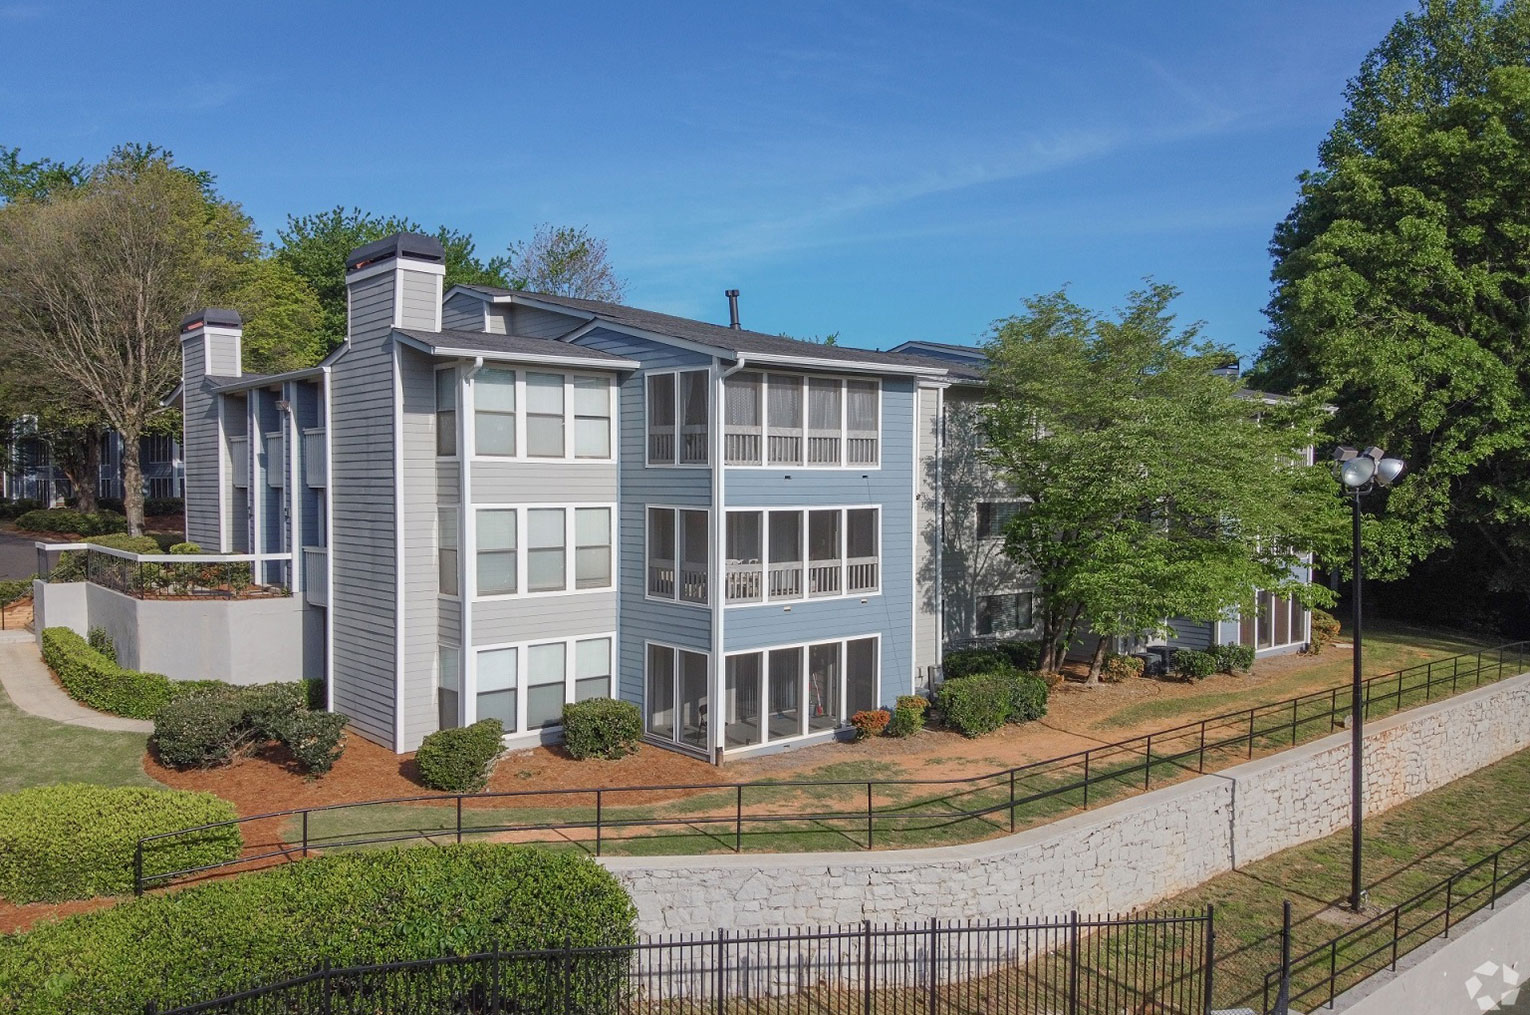 ECI Group announces the sale of Chatsworth Apartments in the Central Perimeter area in Chamblee, GA for $87 million